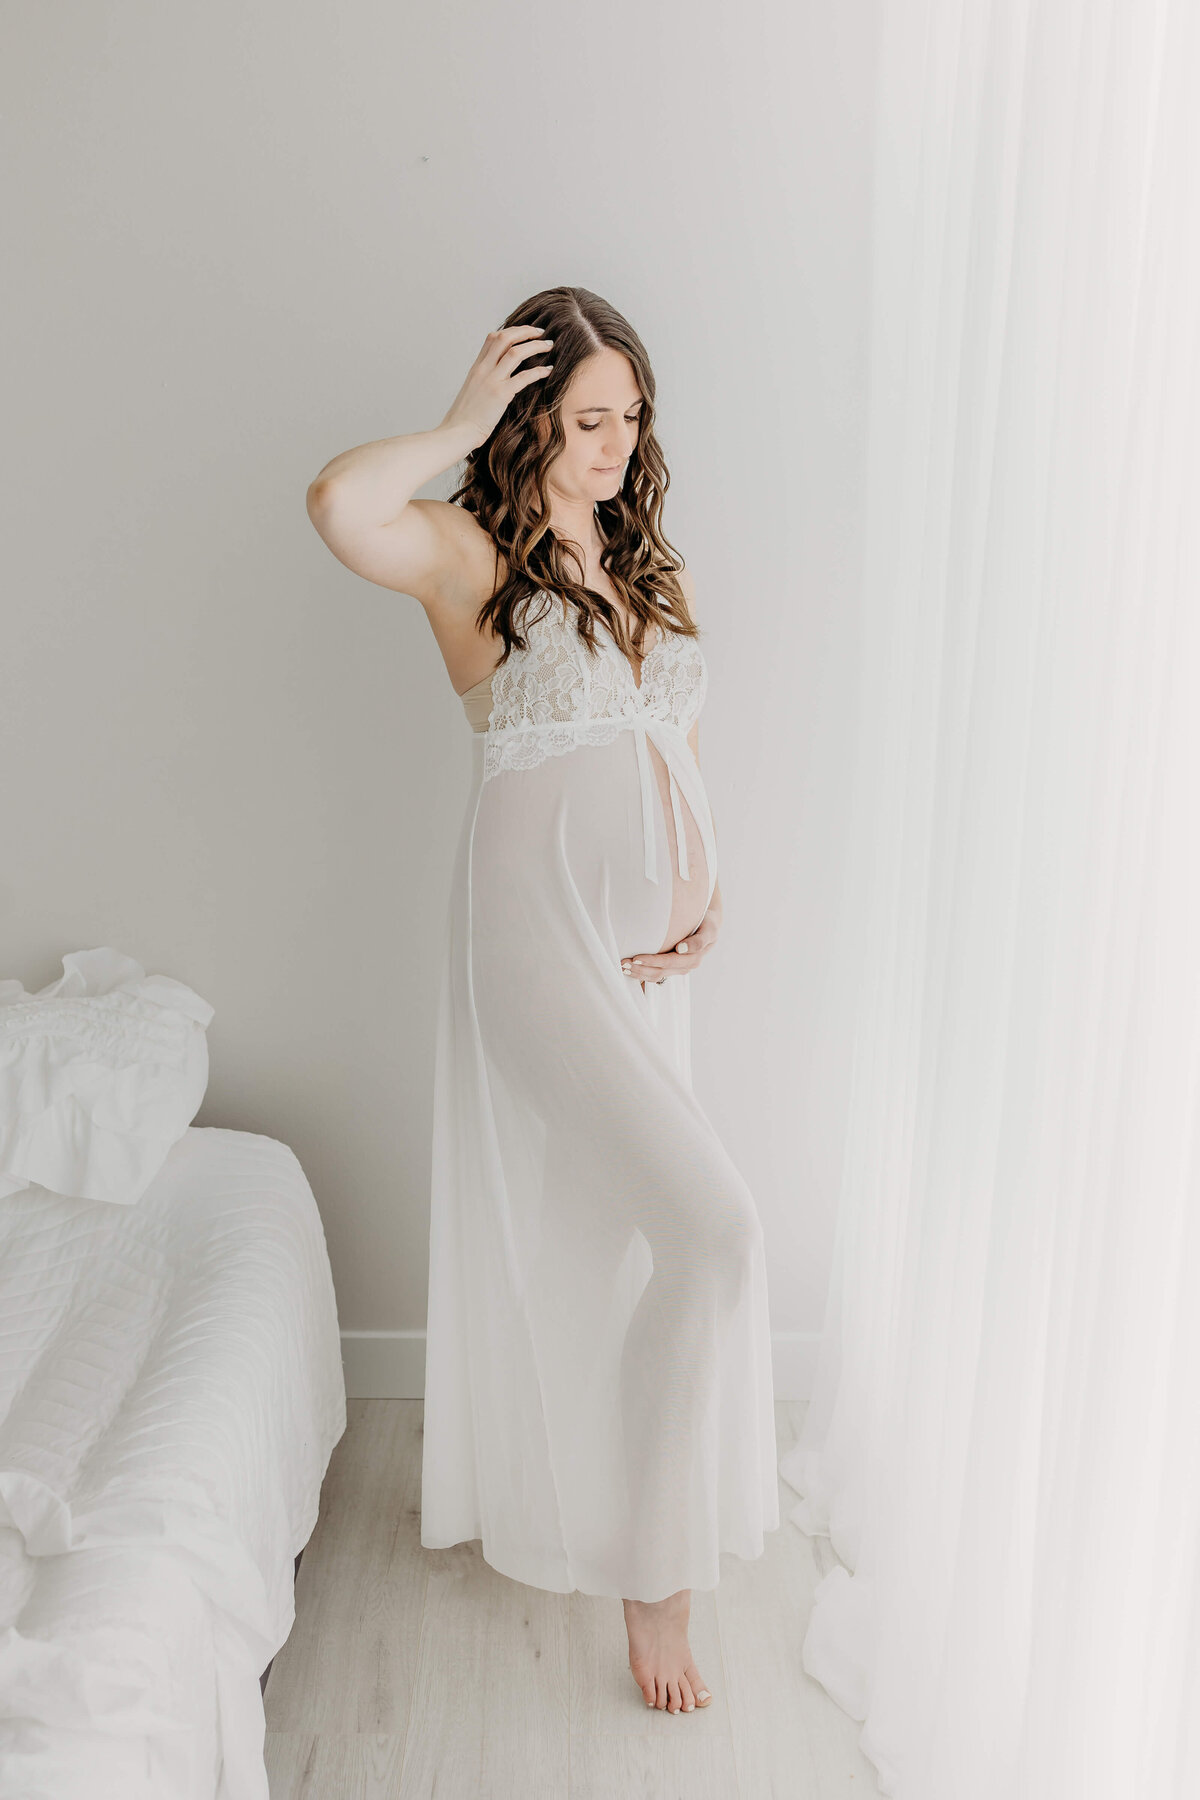 Full portrait of expecting mom in white maternity robe standing by window